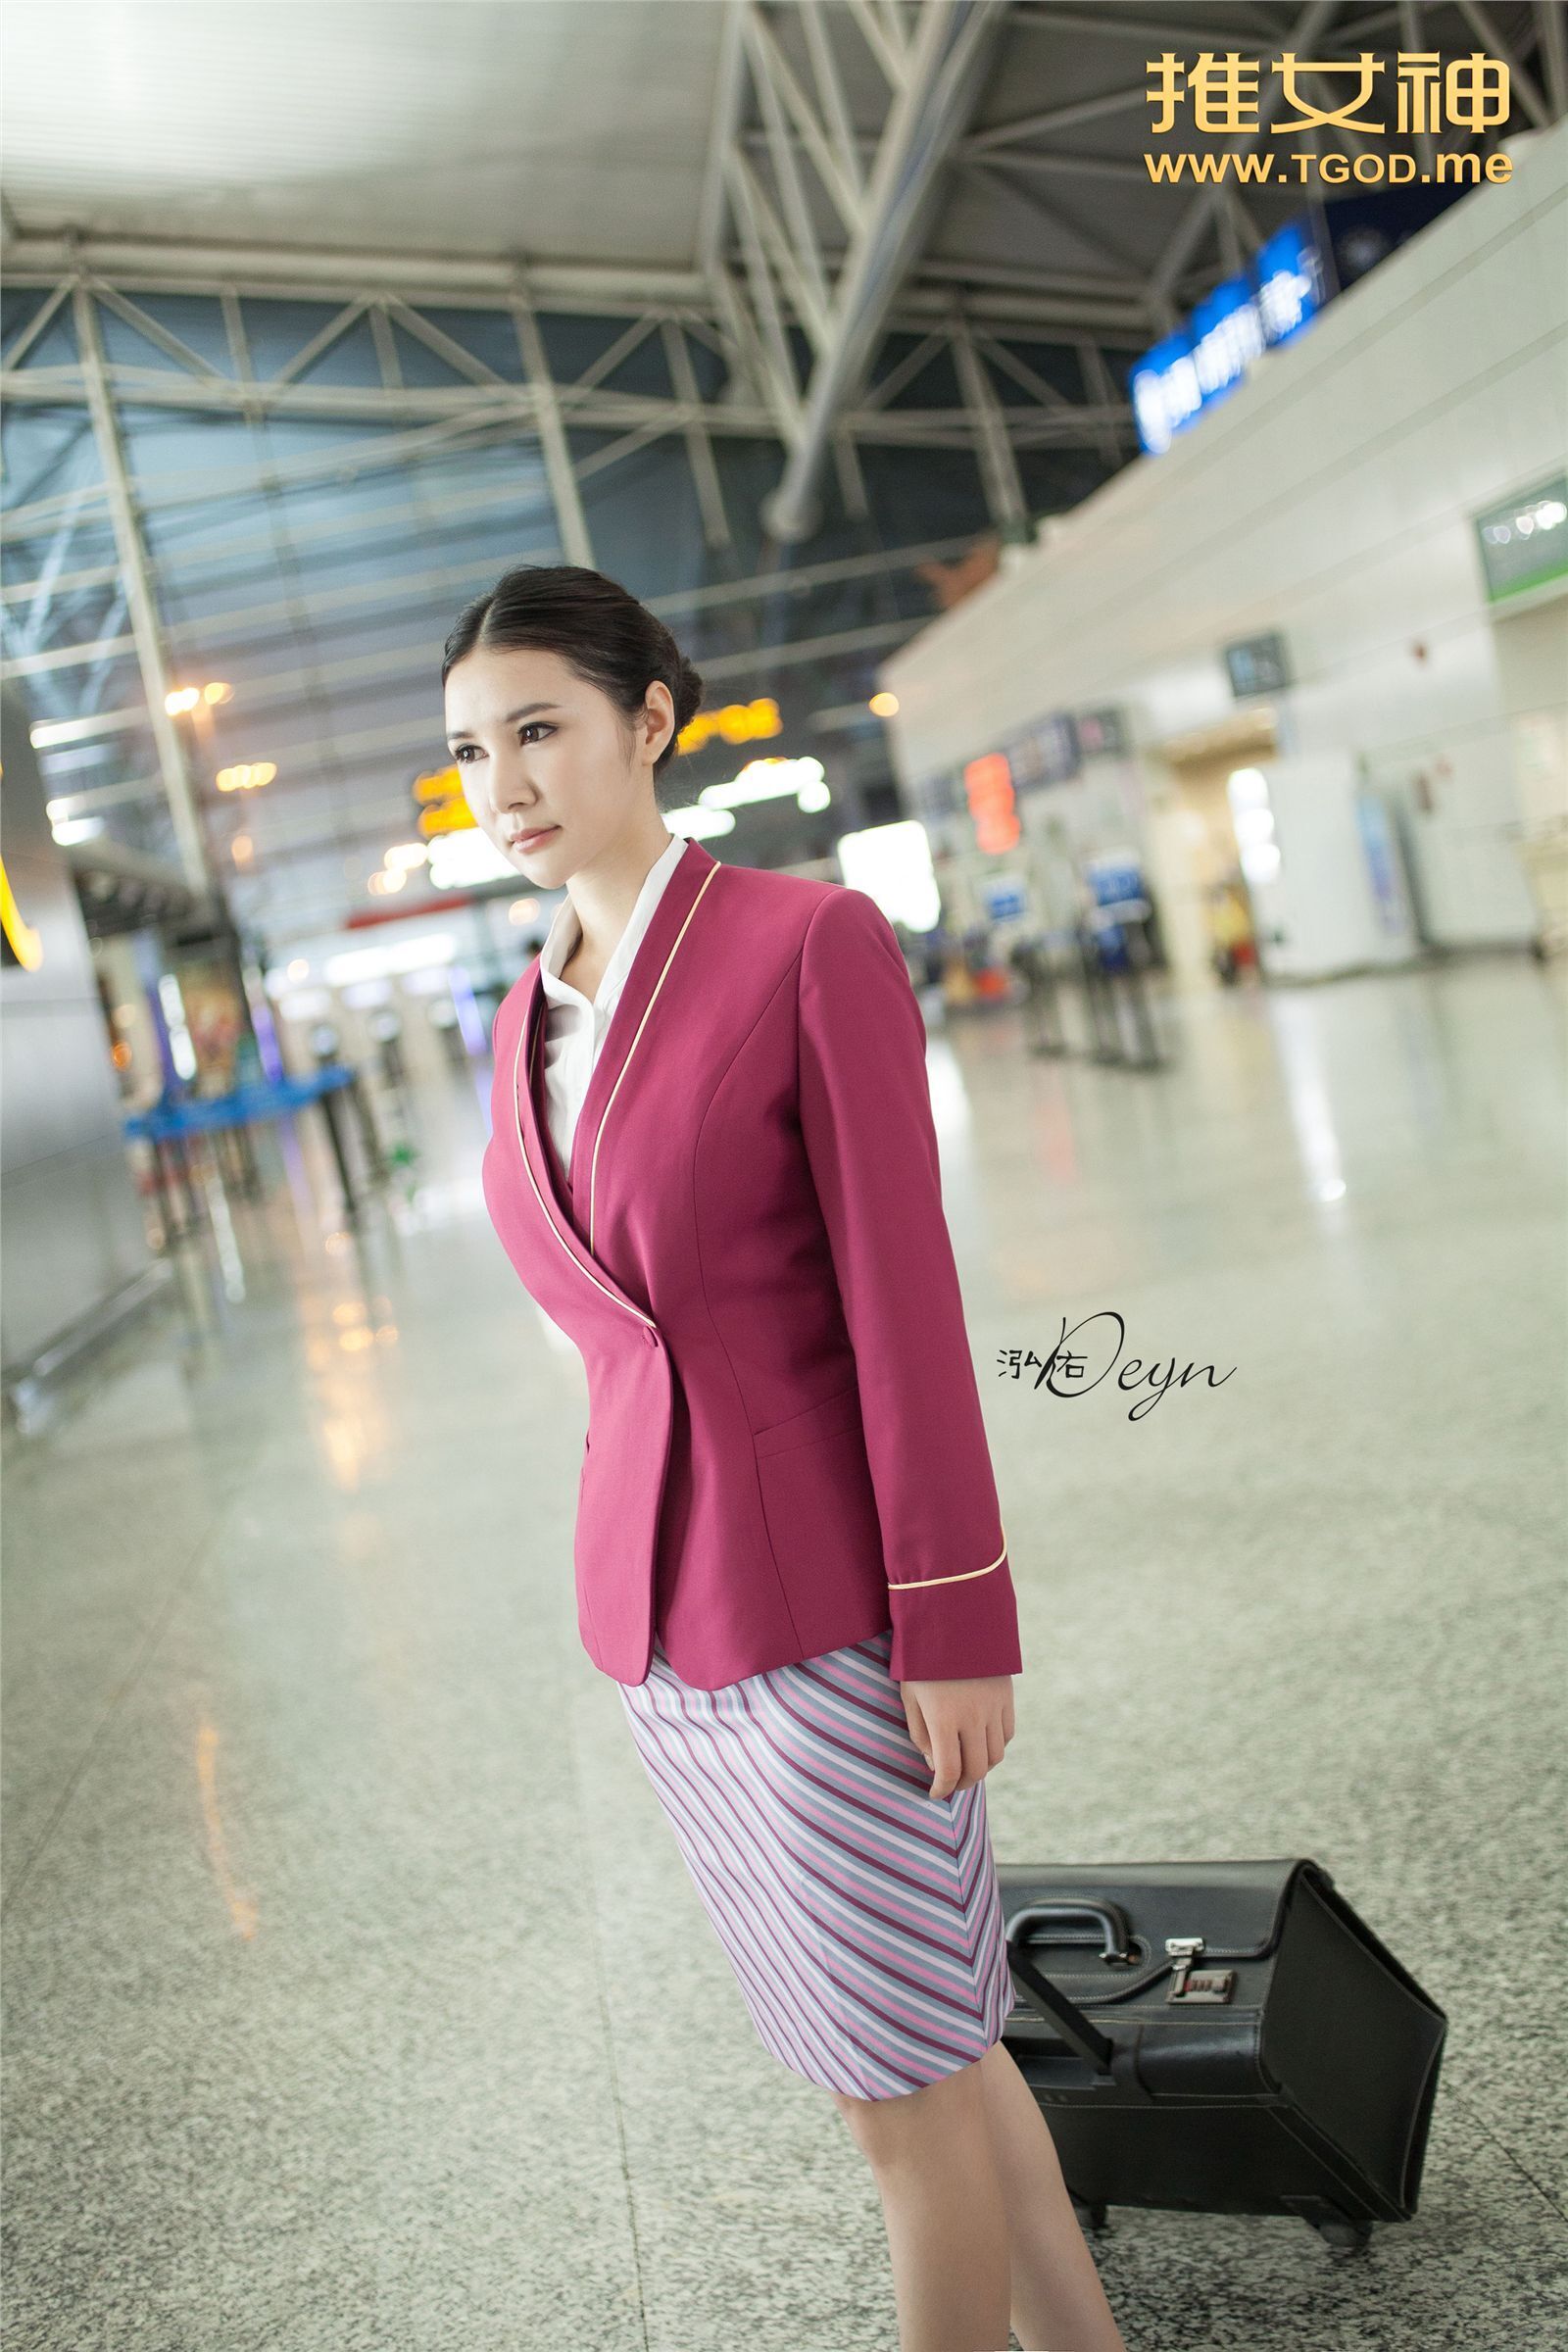 [tgod tweet goddess] Gu Xinyi's lost stewardess' private life in airport on October 23, 2014 (Part 1)